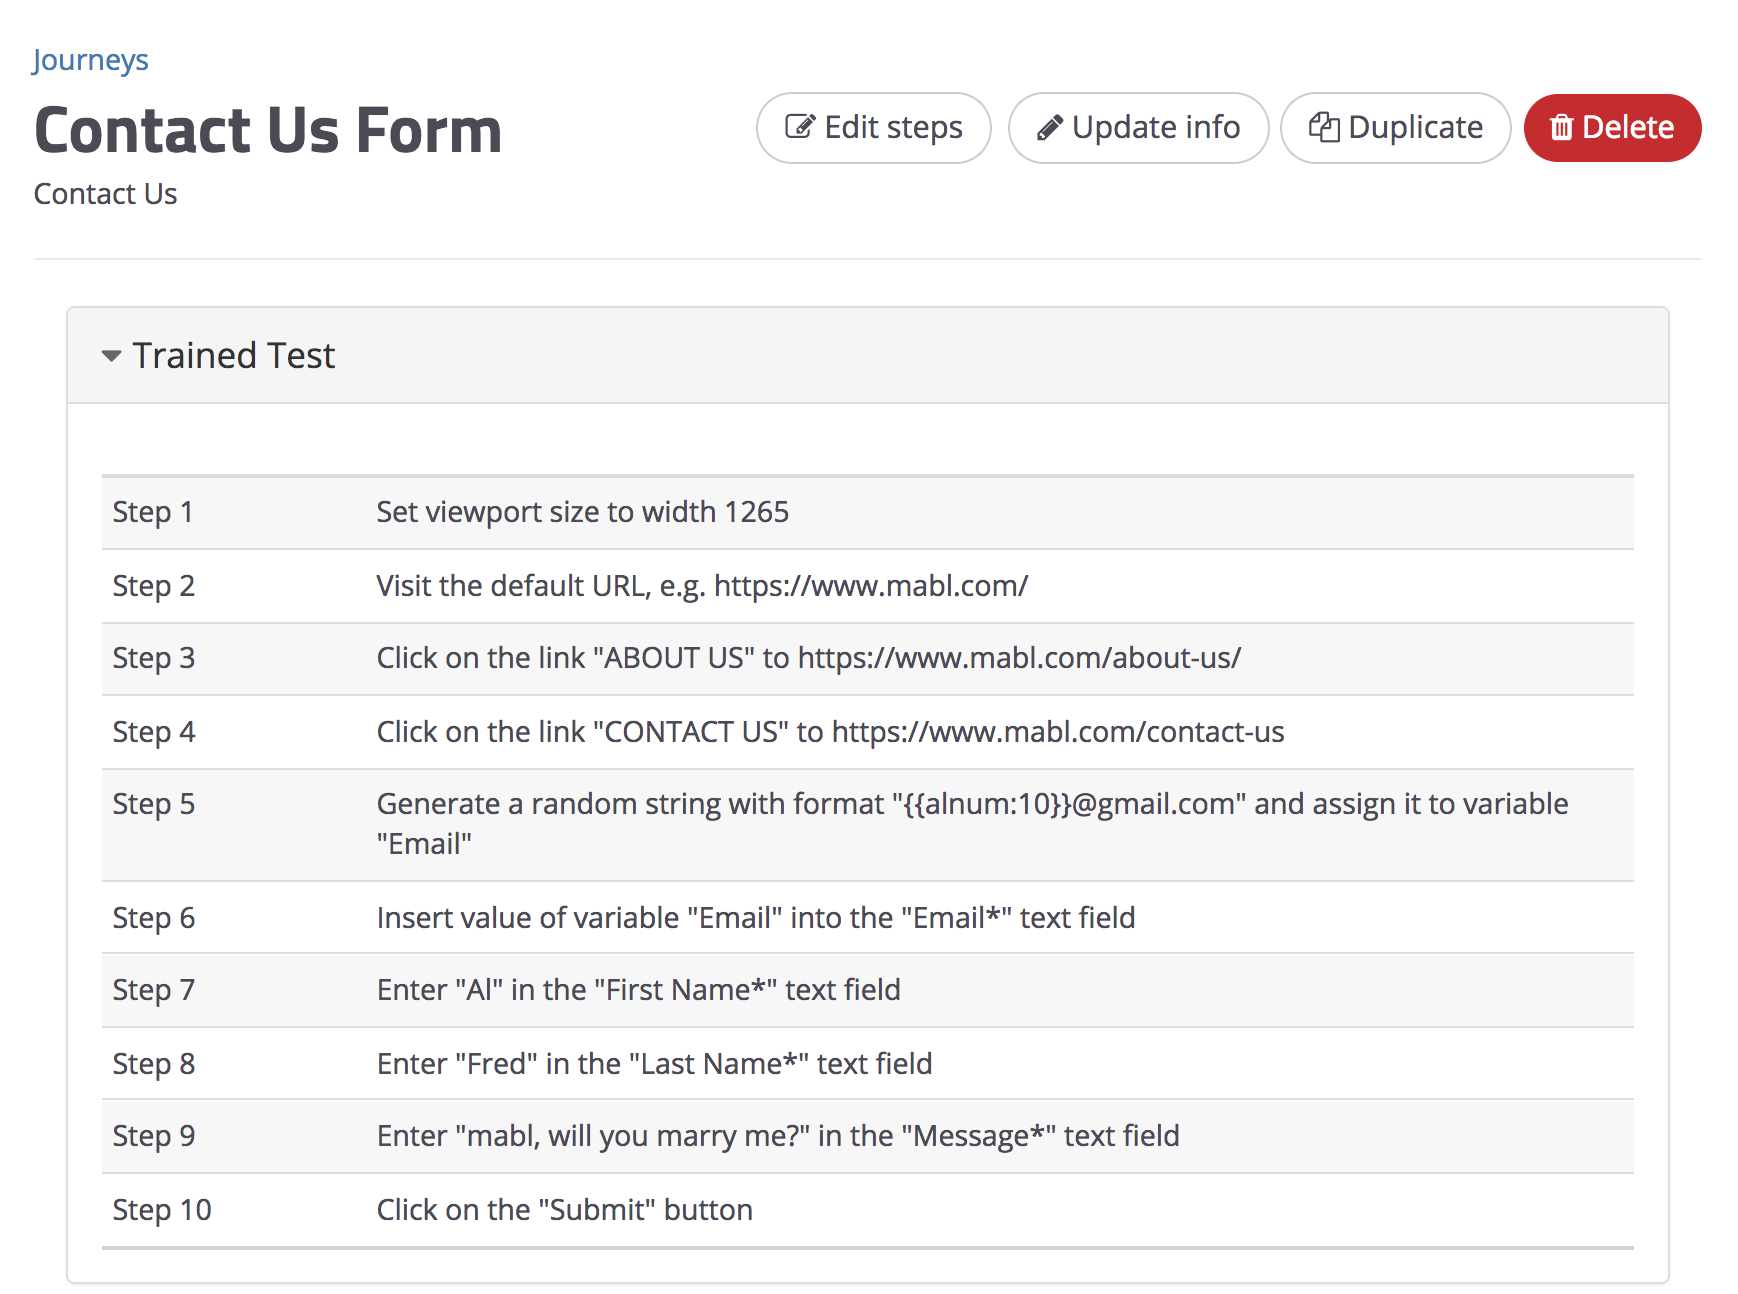 A screenshot showing a Contact Us Form reusable flow section.